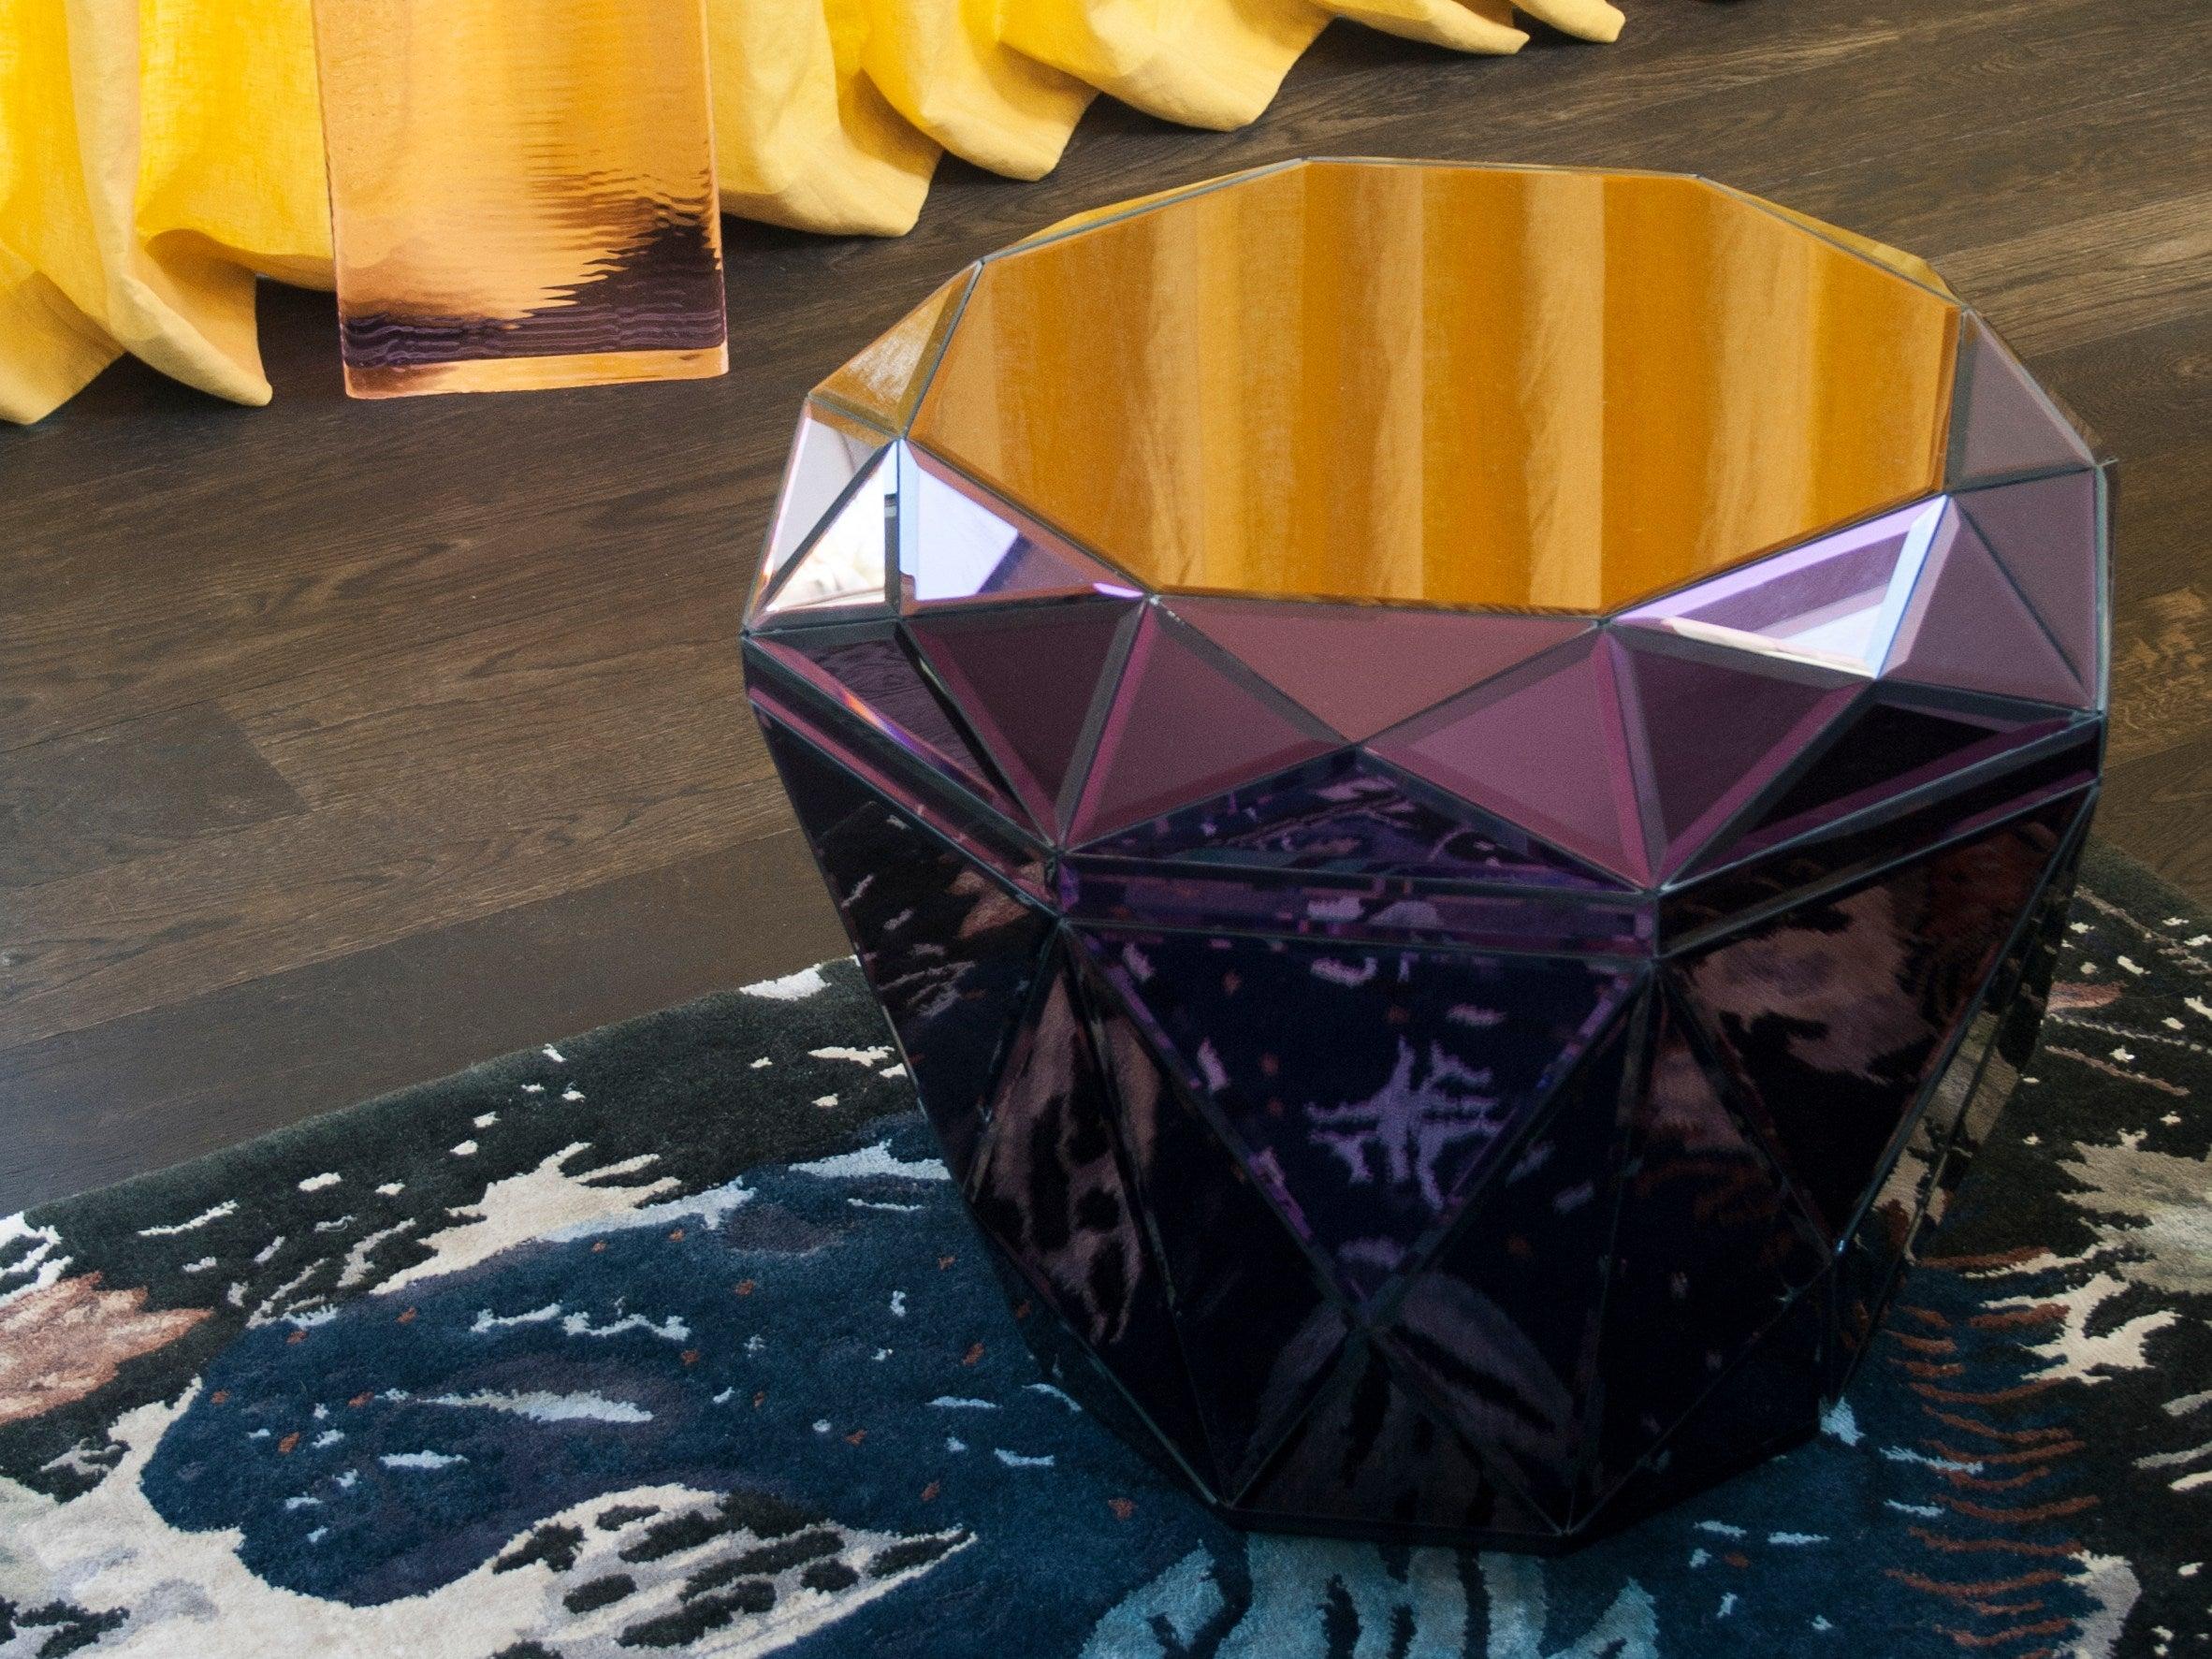 Diamond burgundy coffee table
Measure: 4 mm faceted mirror on black painted mdf
L 55 x H 45 x D 55 cm

With its sleek, mirrored surface, you won't be able to take your eyes off a diamond table. Give your space a unique edge with this modern